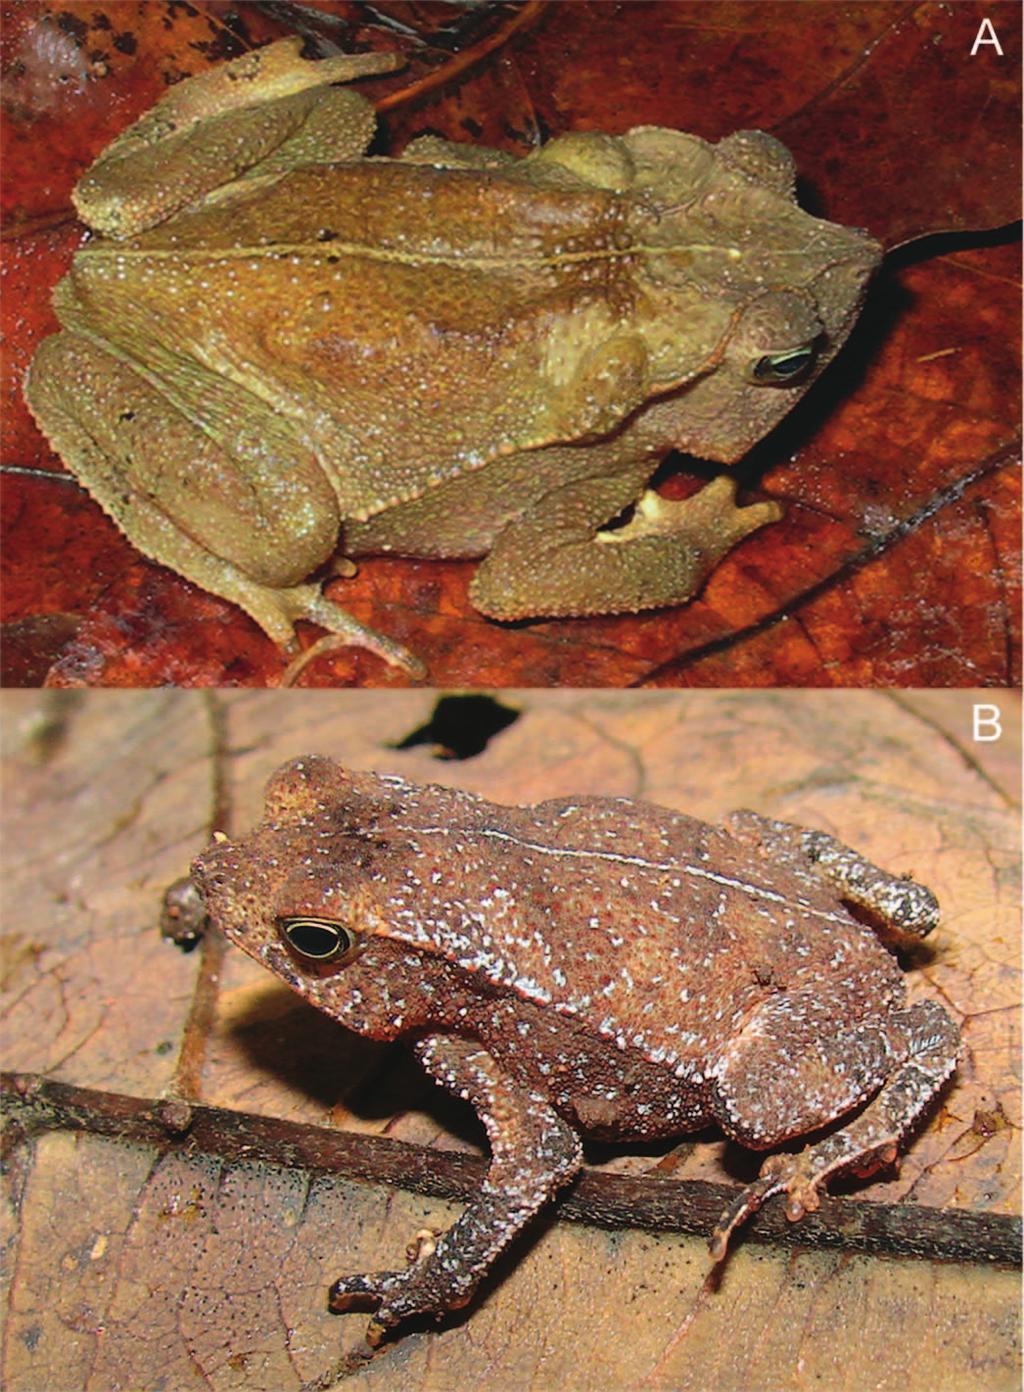 216 Herpetologica 71(3), 2015 TABLE 1. Measurements (millimeters) of Rhinella sebbeni sp. nov. (n 5 13). For each sex, means are reported 61 SD, followed by range.